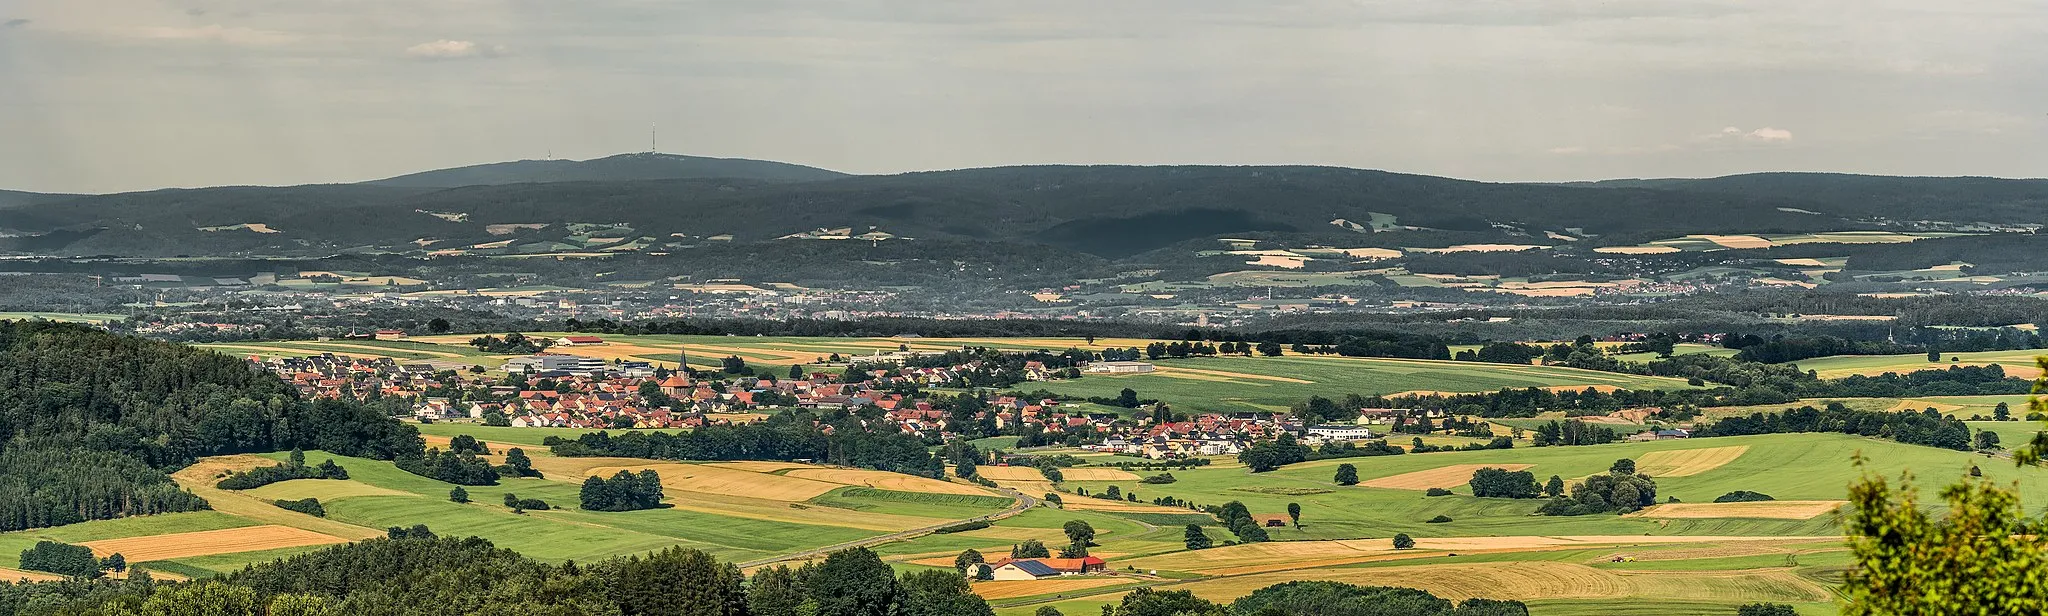 Photo showing: View from the Neubürg direction towards Fichtelgebirge with the Ochsenkopf. In the foreground Mistelgau can be seen, behind Bayreuth.